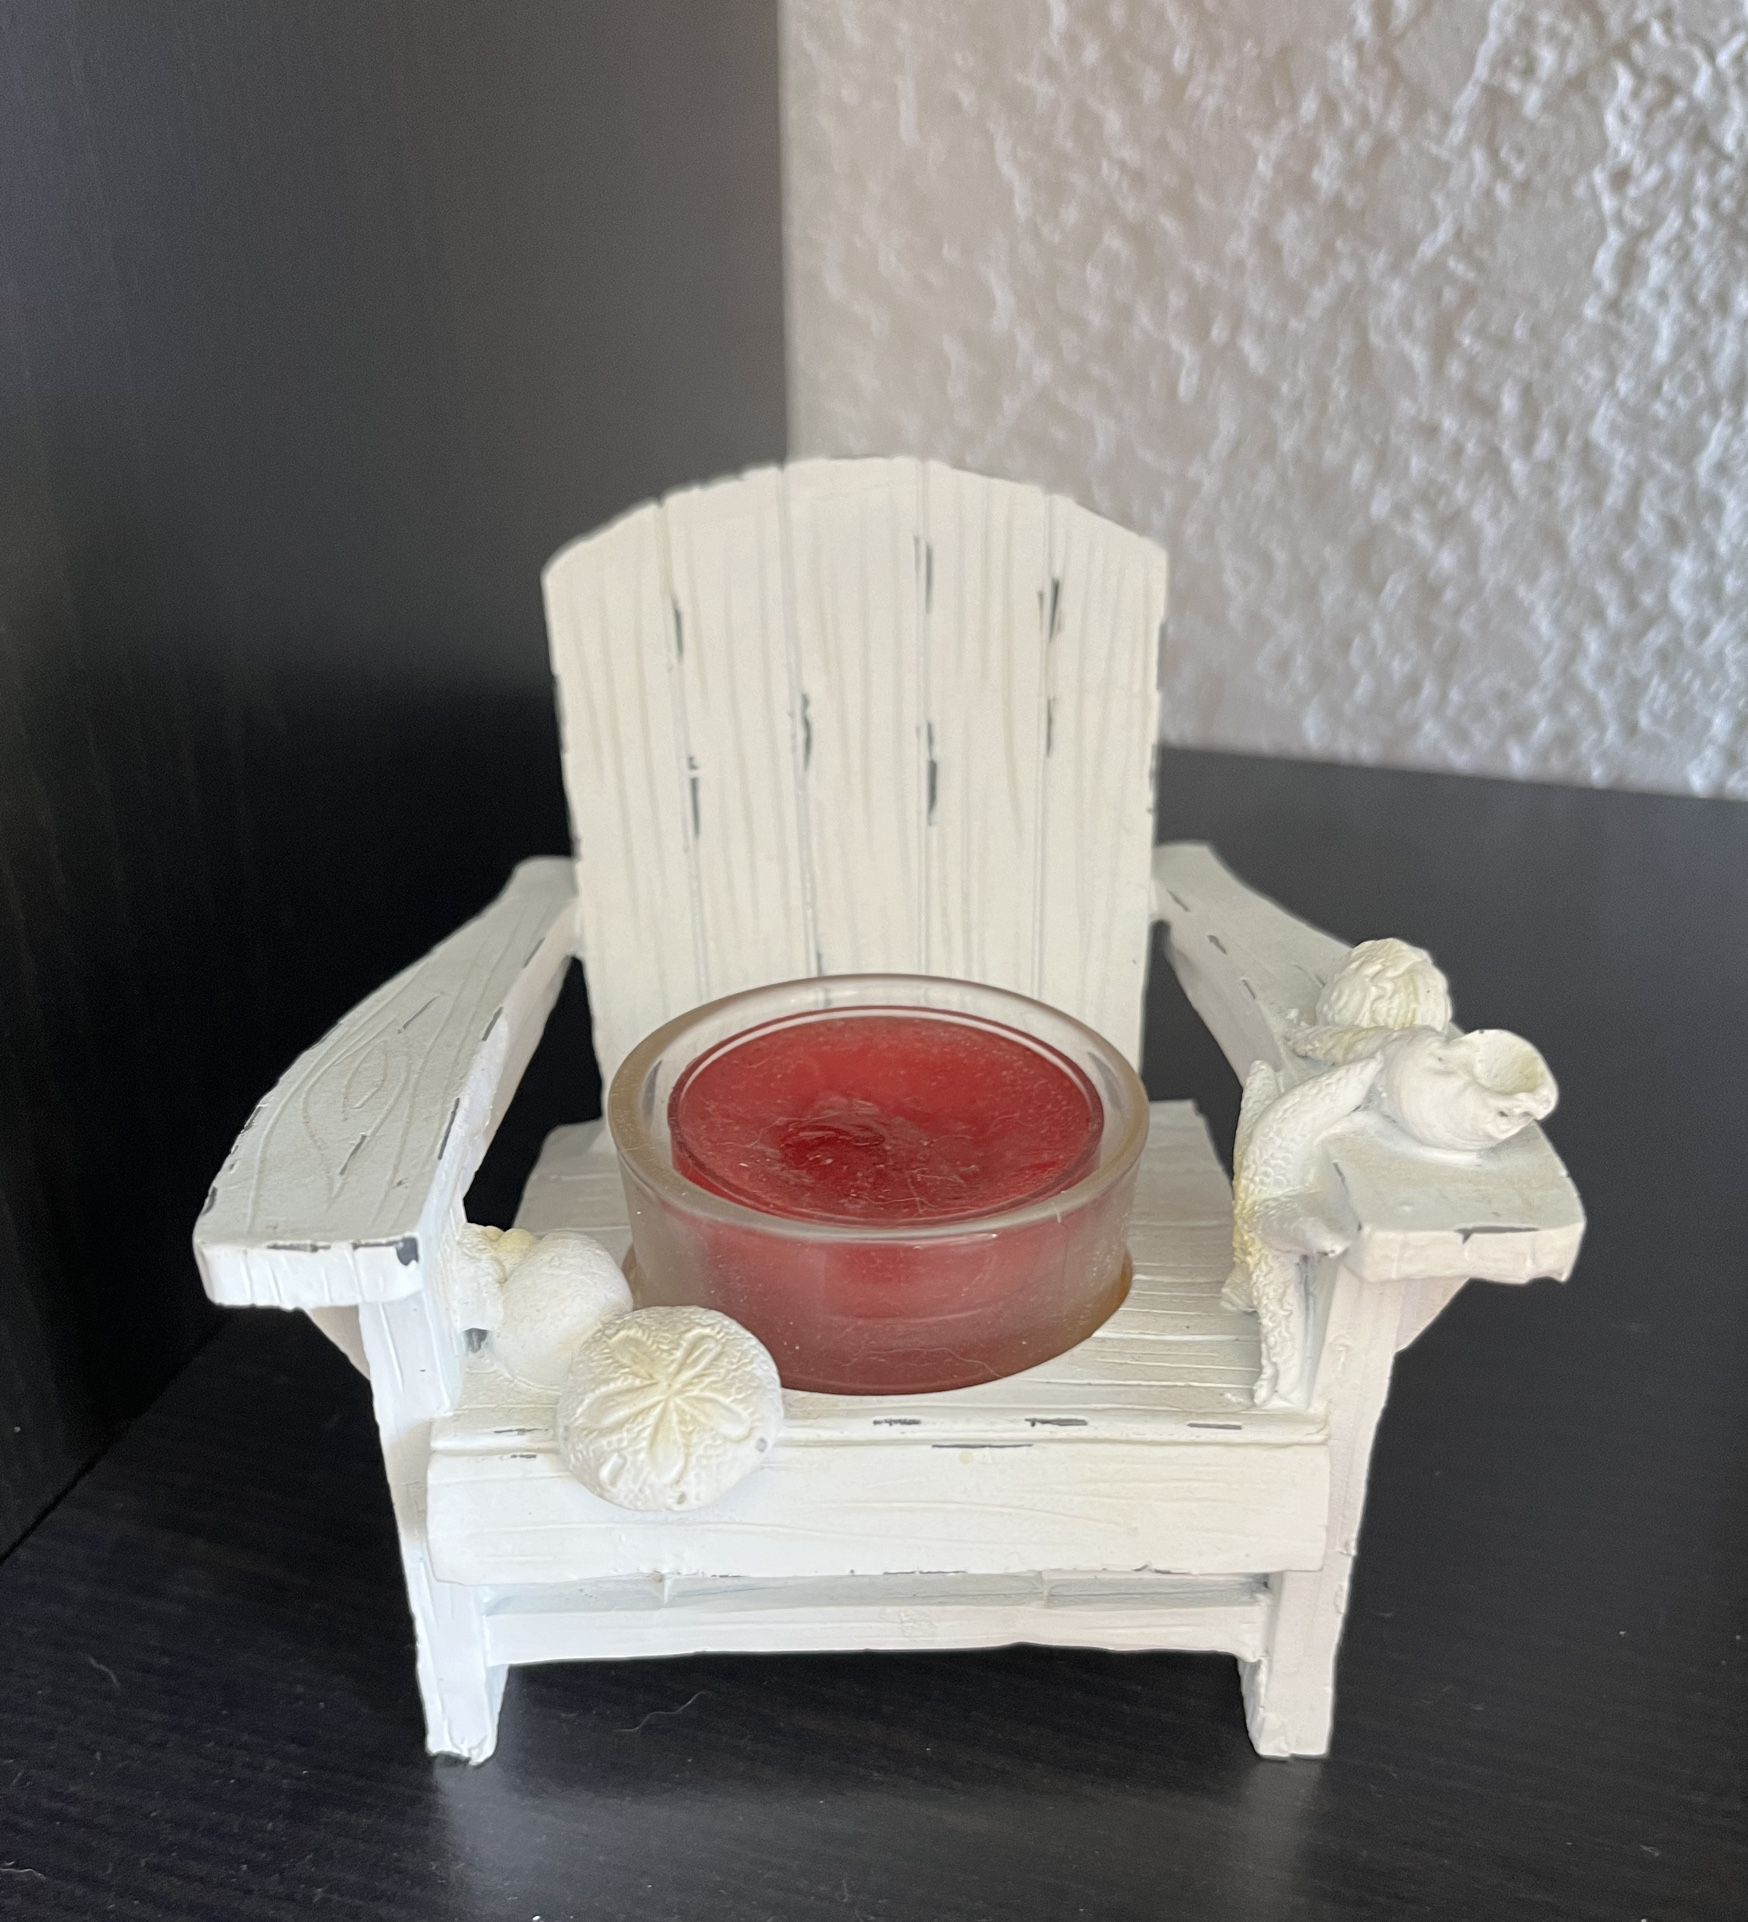 Yankee Candle Beach Chair Candle holder